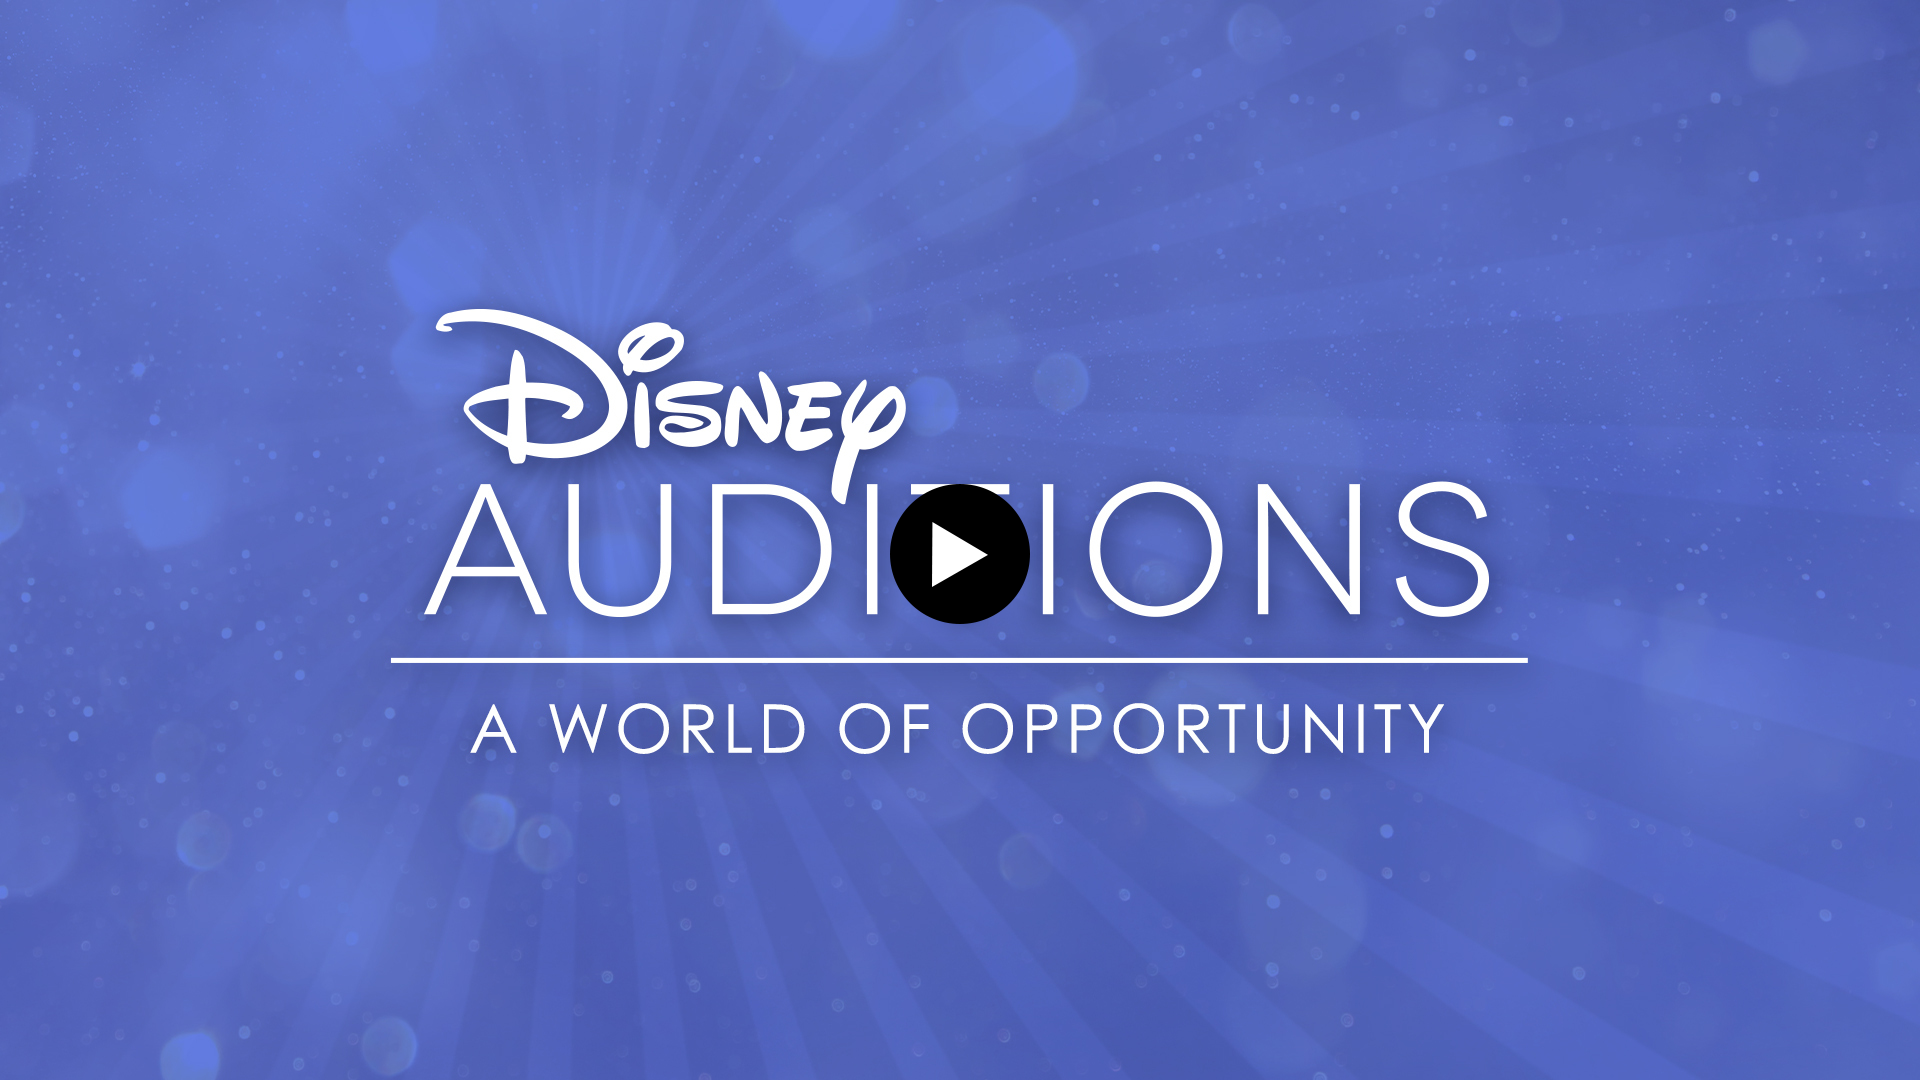 Disney Auditions - A World Of Opportunity